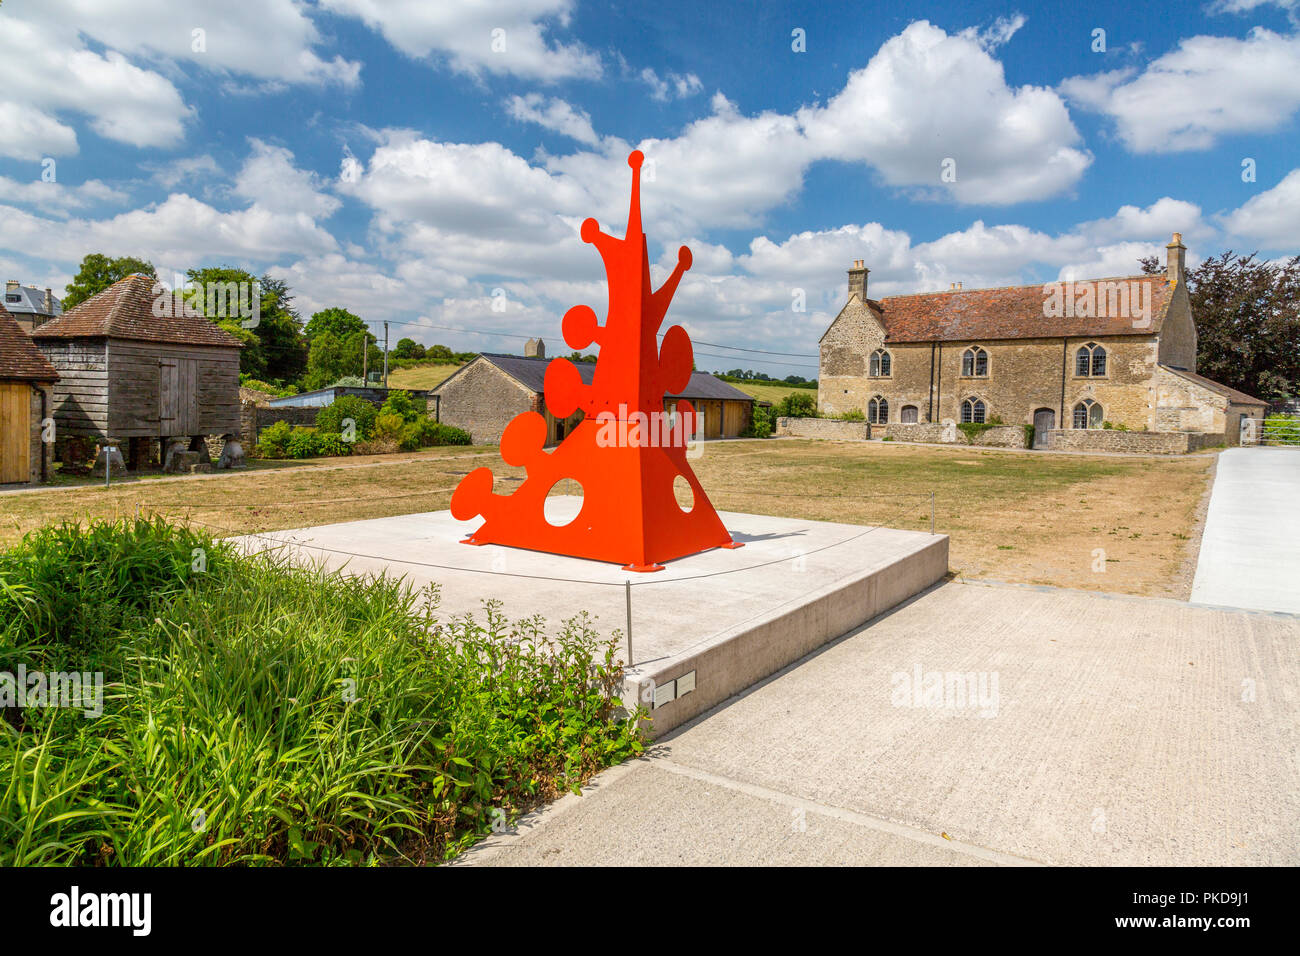 Alexander Calder's vivid Outdoor Mobiles and Stabiles at the Hauser & Wirth Gallery, Durslade Farm, Bruton, Somerset, England, UK Stock Photo